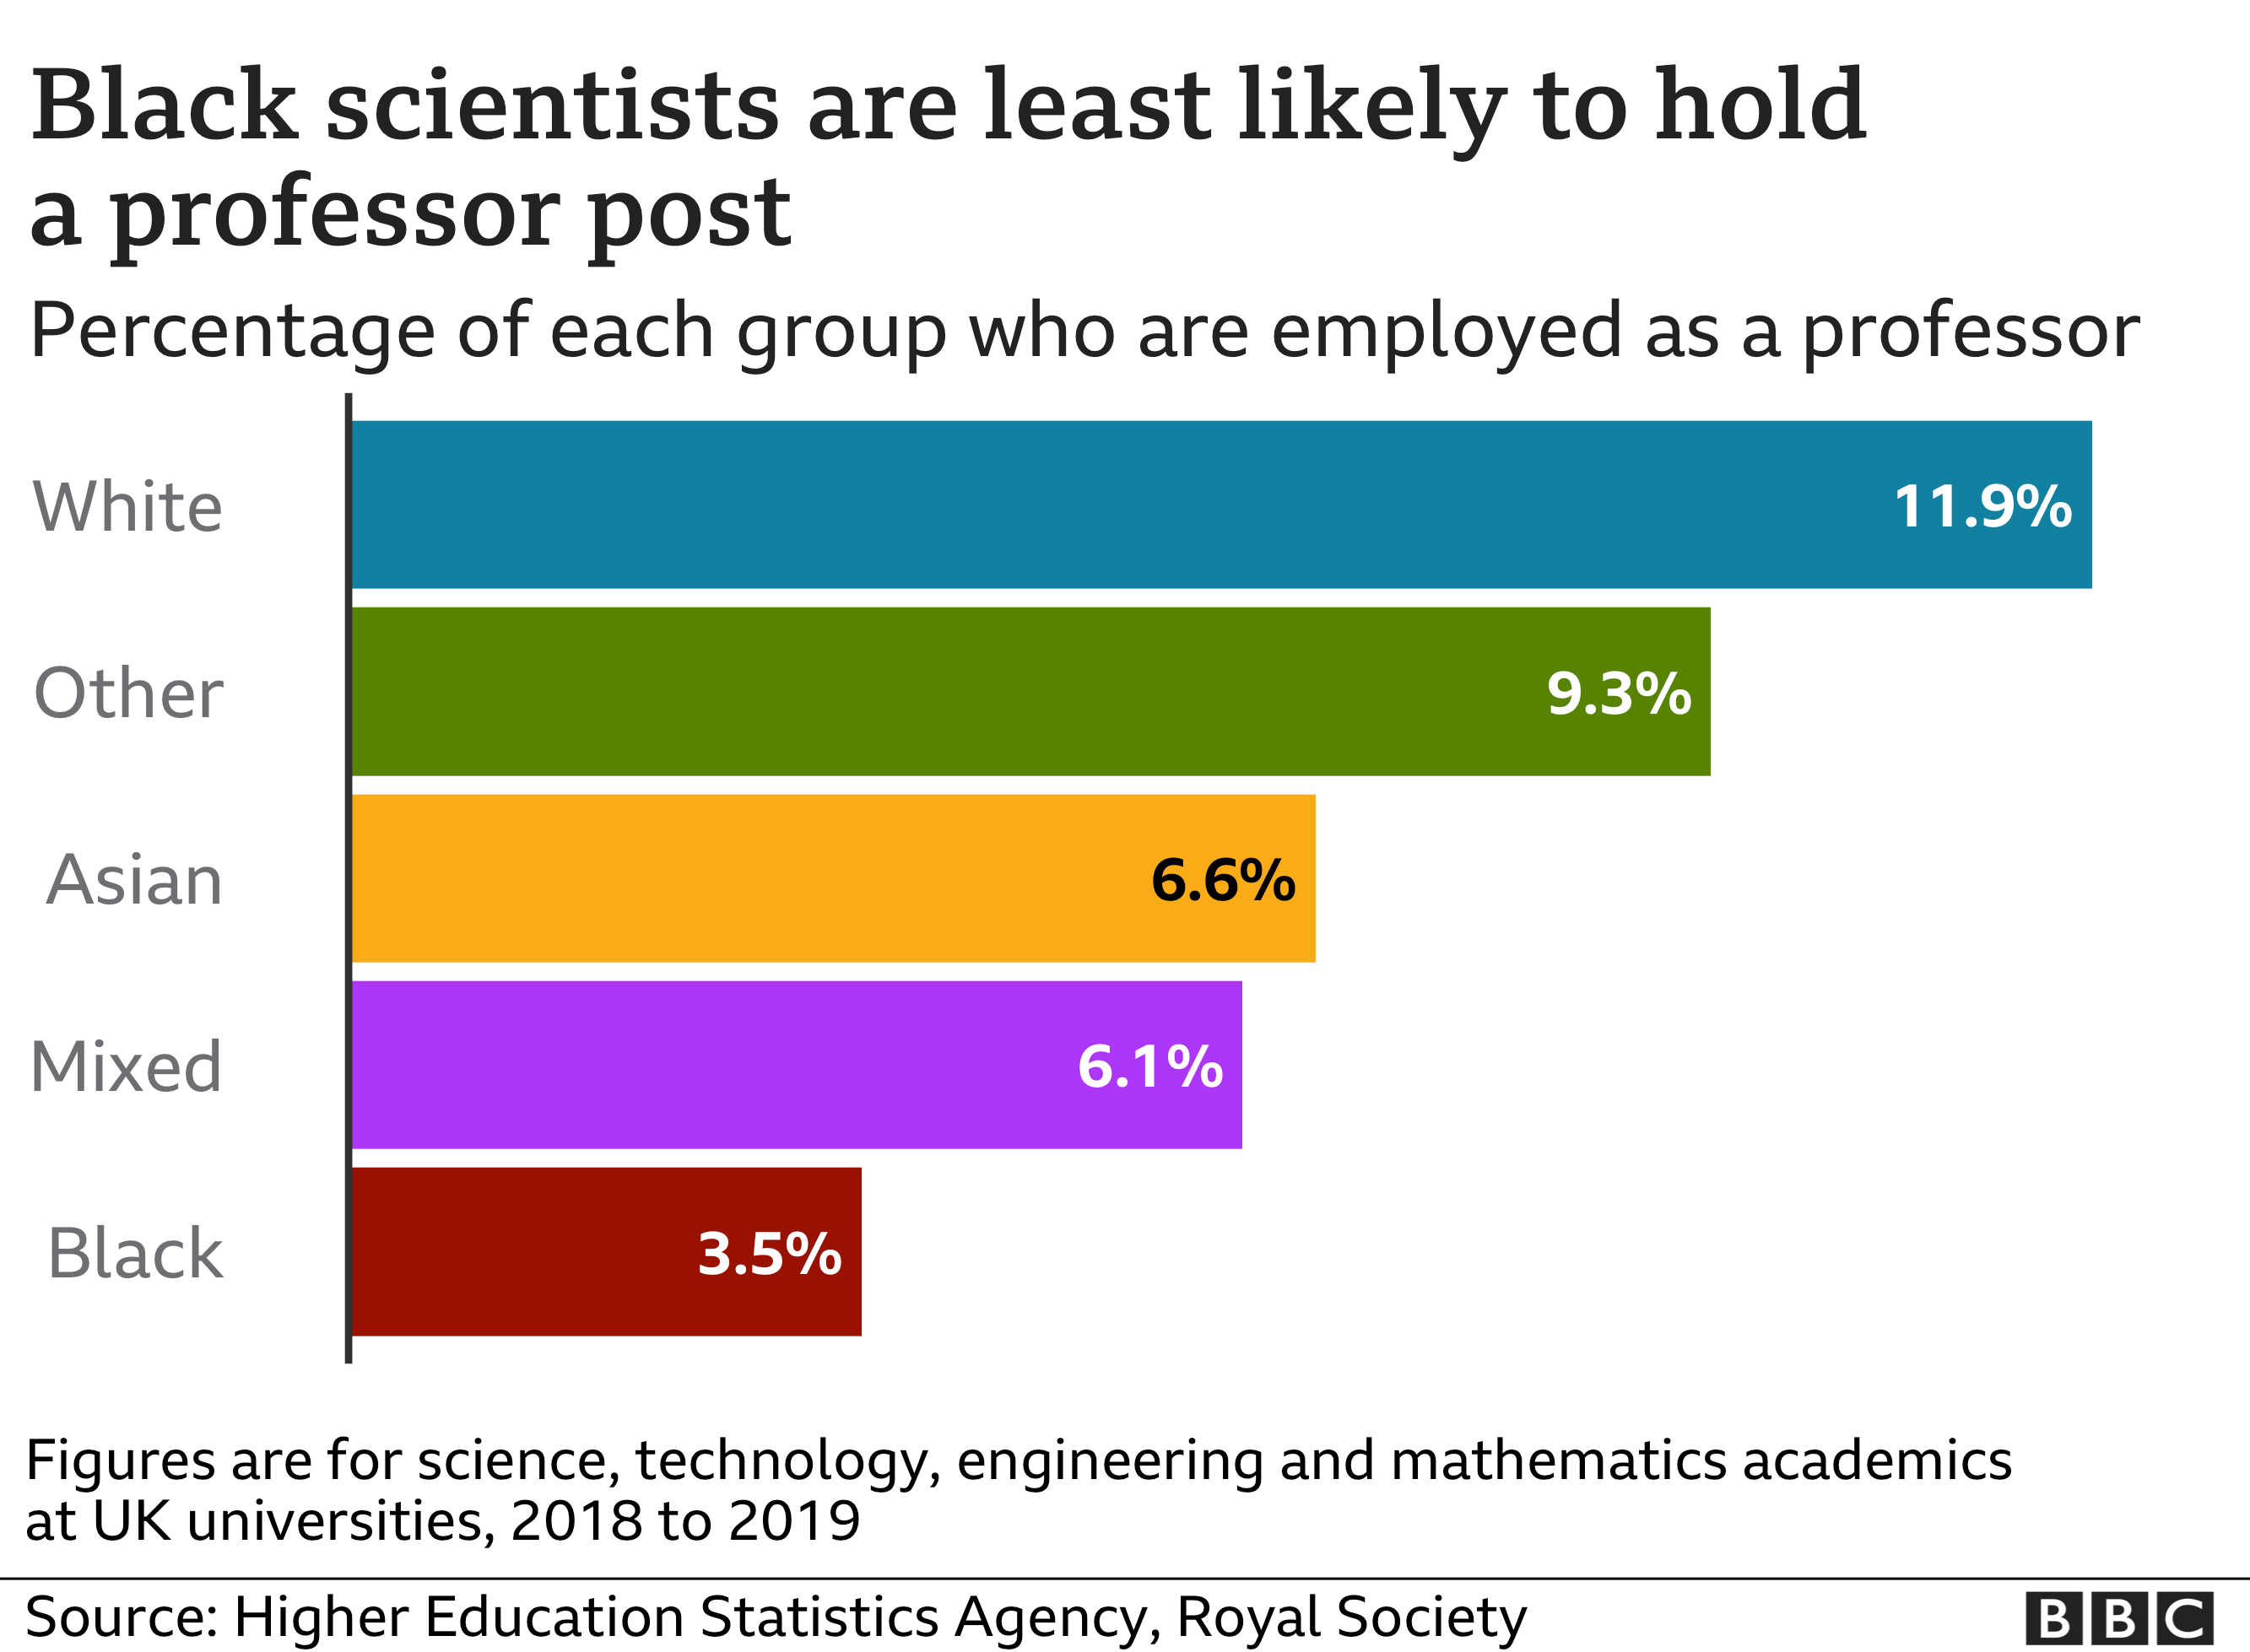 Black scientists least likley to be professors.